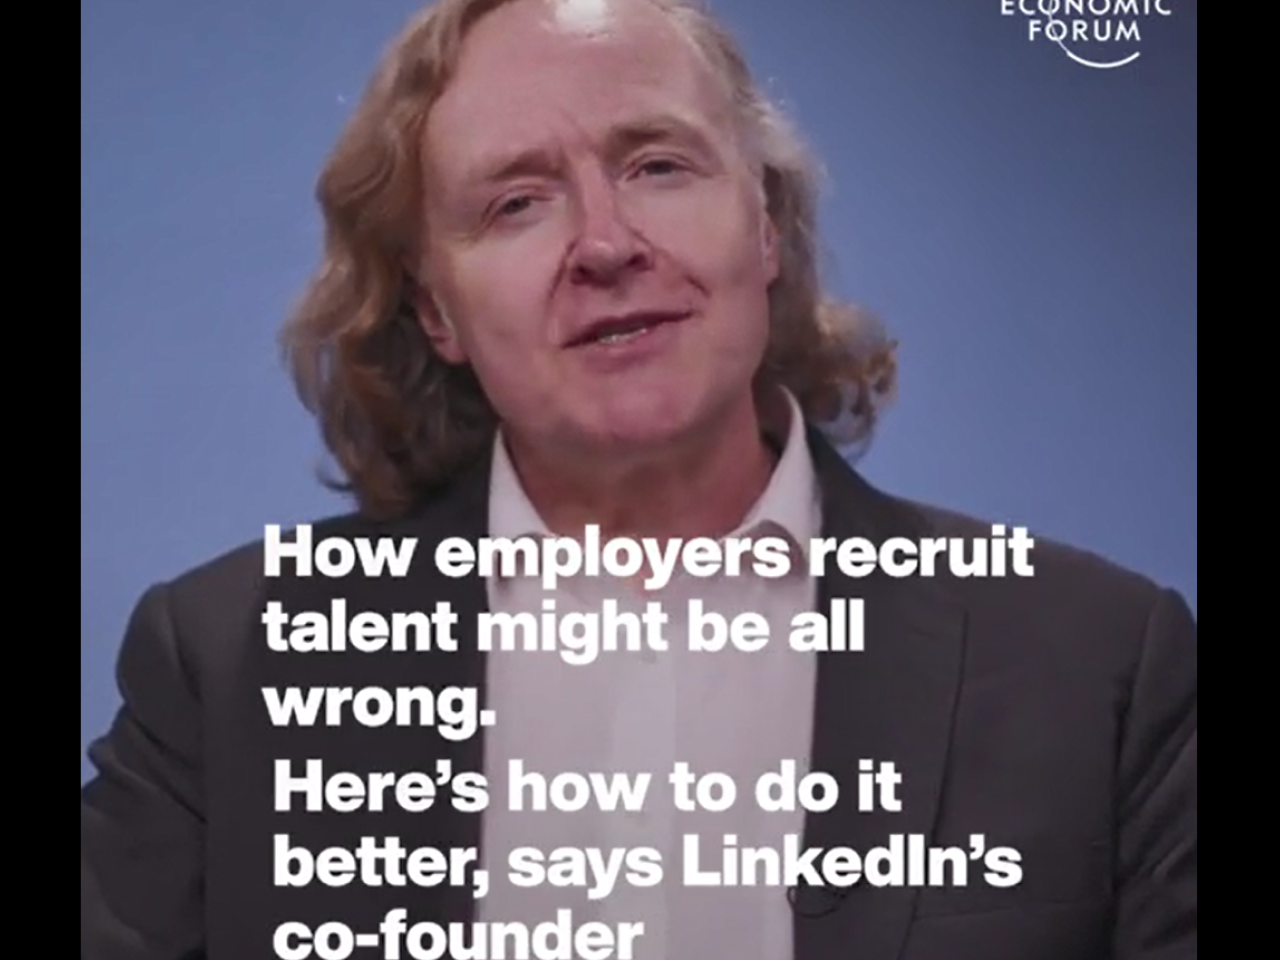 LinkedIn co-founder interview.